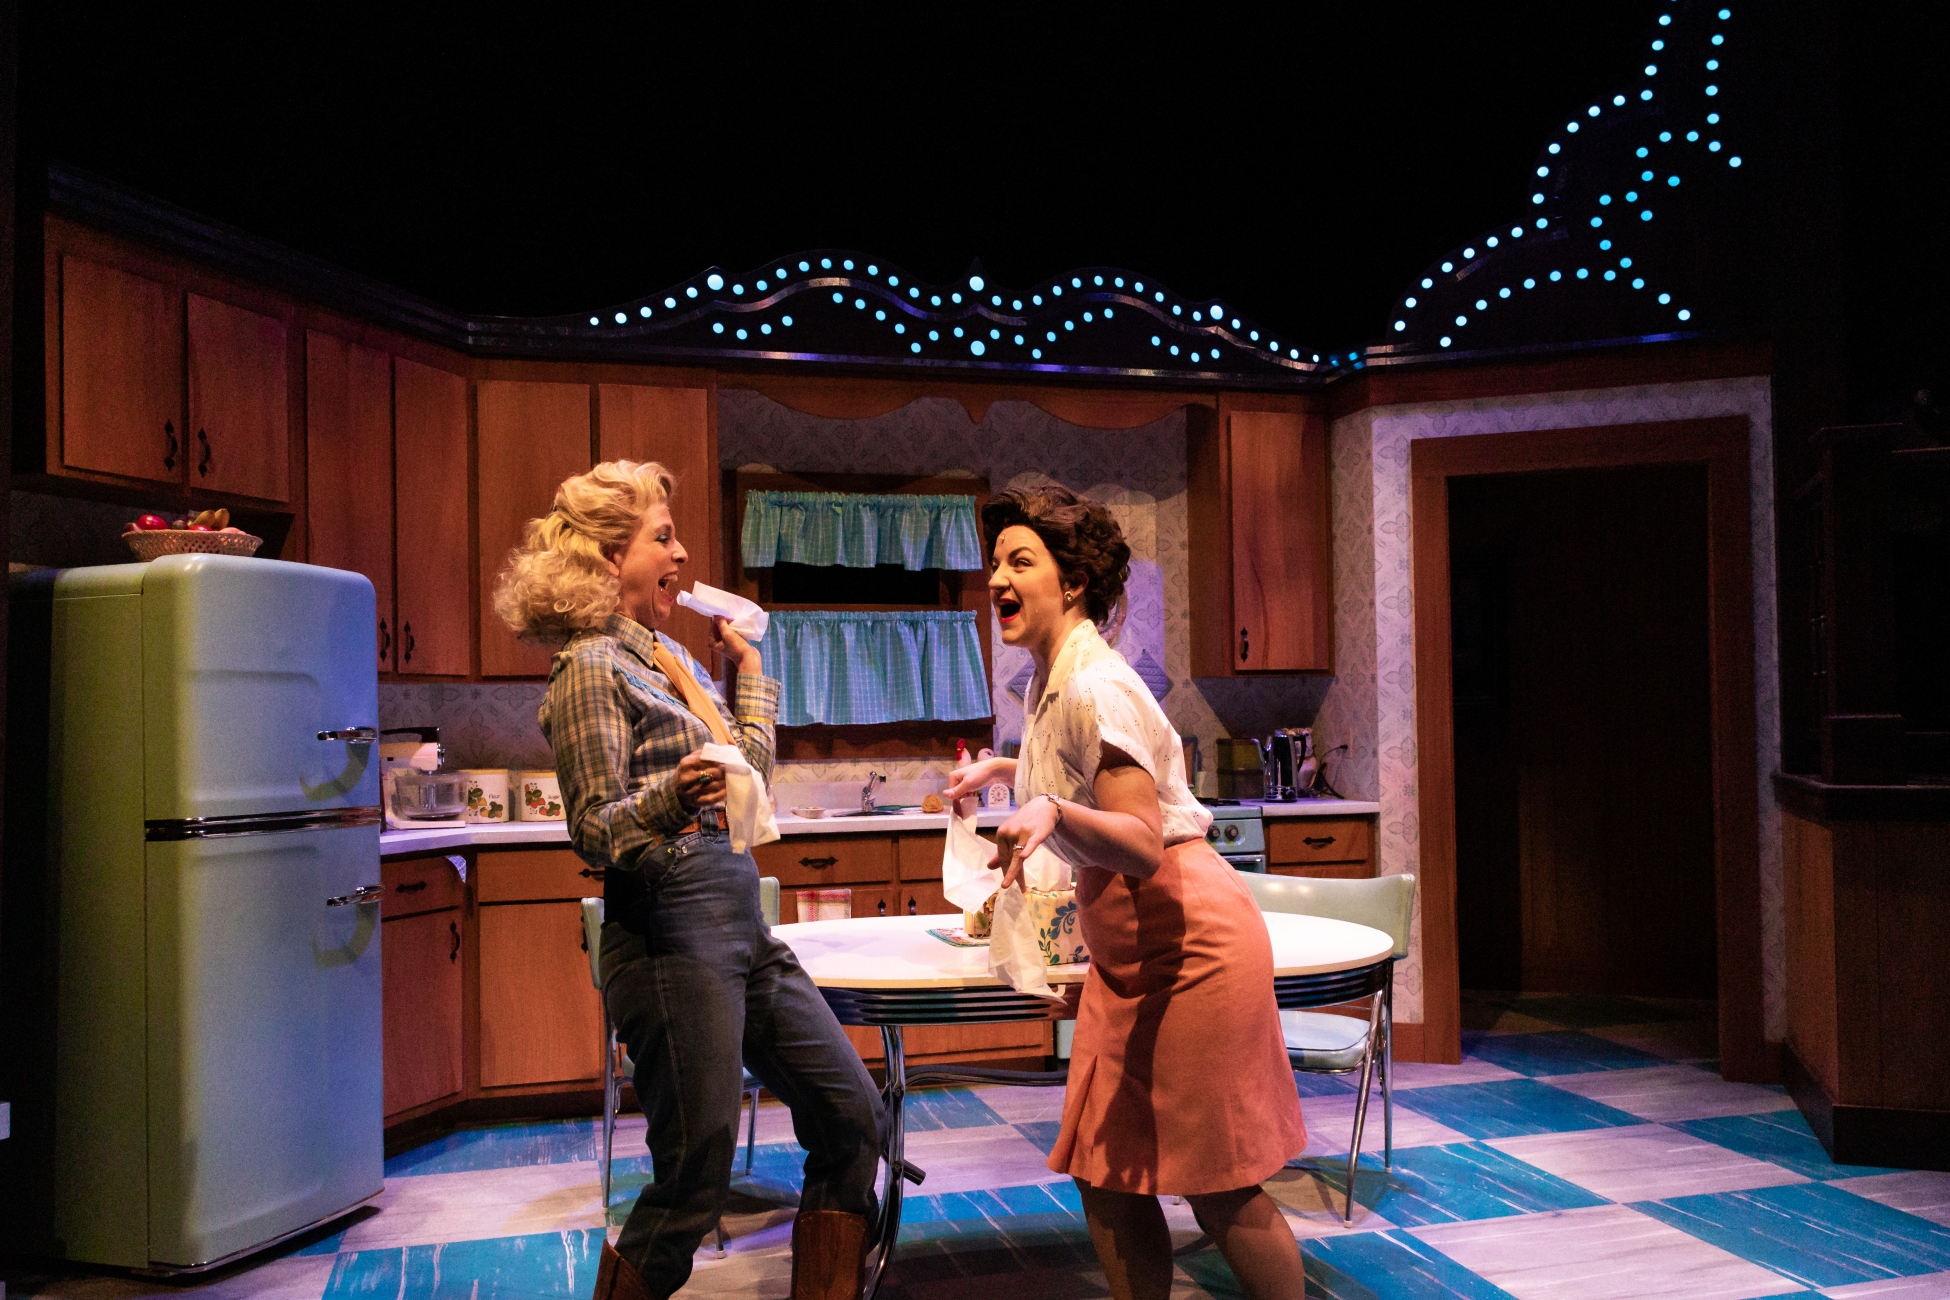 Cassie Chilton as Patsy Cline and Katie McFadzen as Louise dancing together in a kitchen.